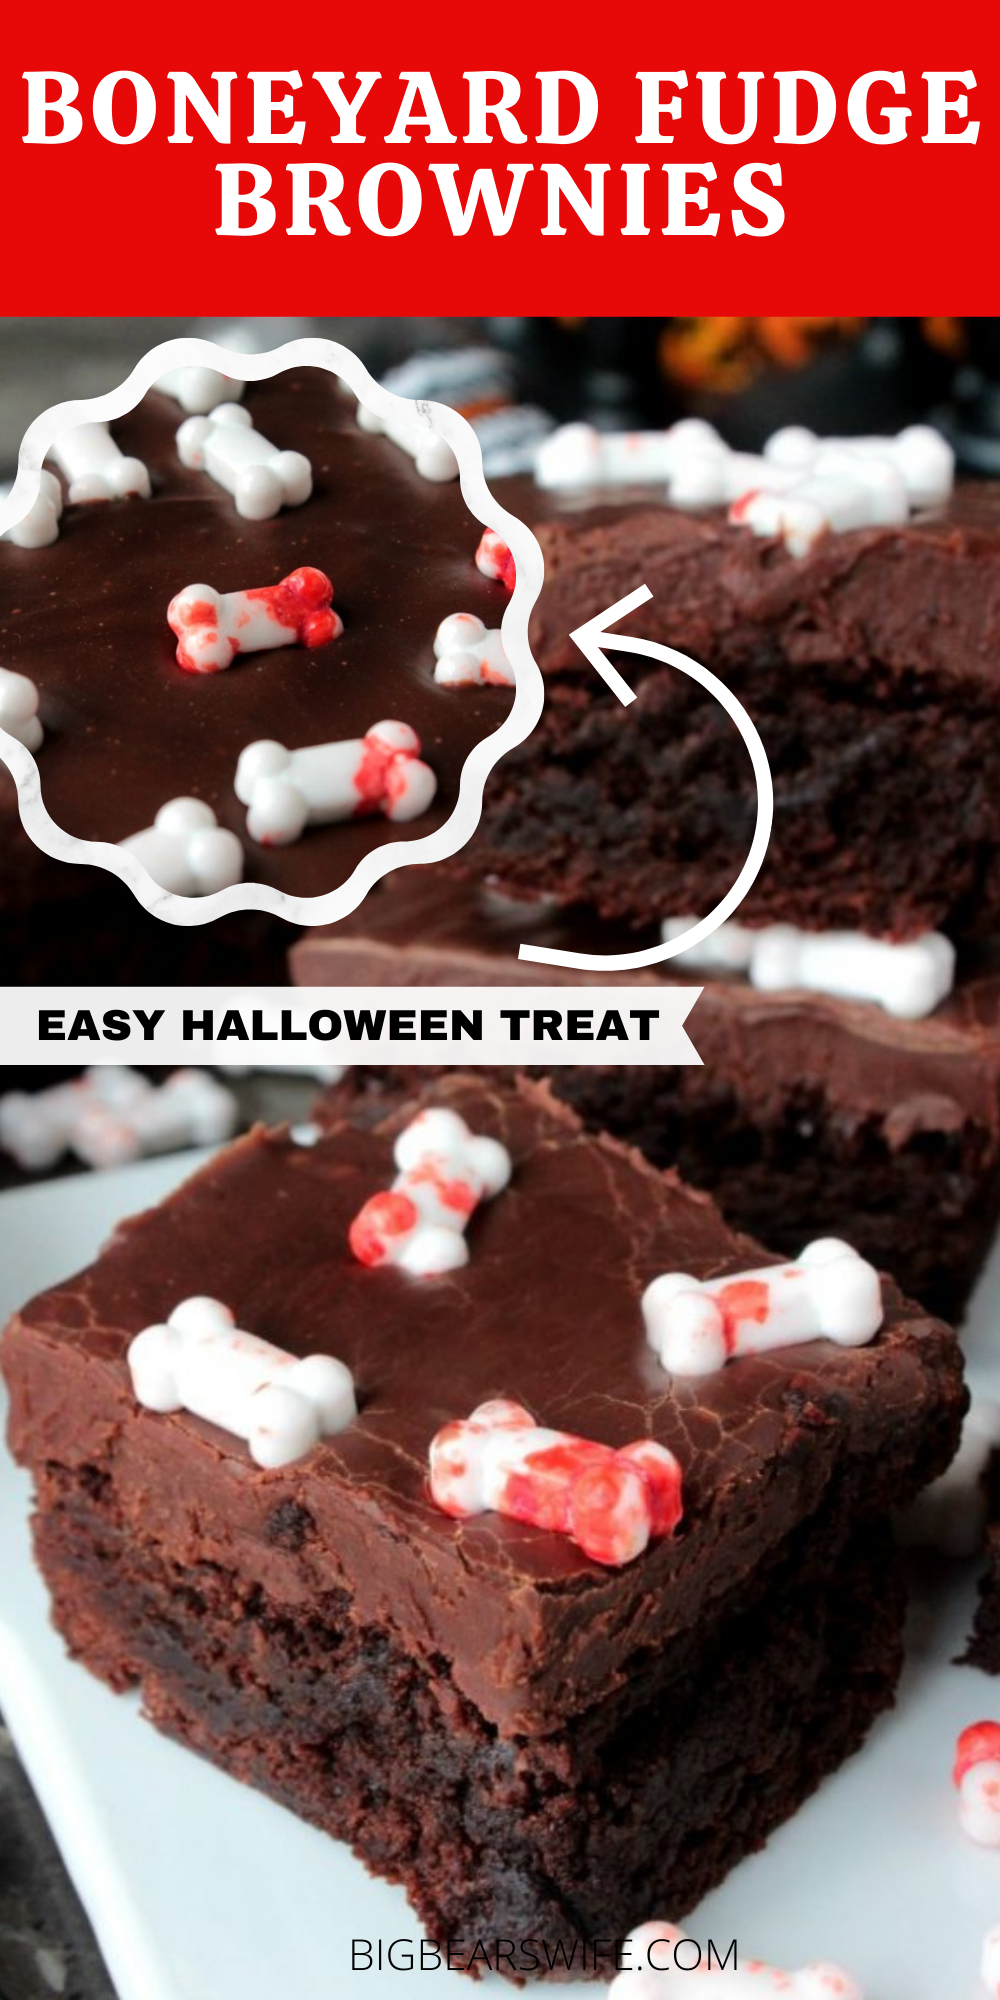 These Boneyard Fudge Brownies are easy to make! You're going to love the top fudge layer and the fudge brownie bottoms! The candy Bones on top are perfect for Halloween! A Super Easy Halloween Treat Recipe! Halloween Brownies are so fun to make and these are great for kids and adults alike! These brownies also have a fudge topping!  via @bigbearswife